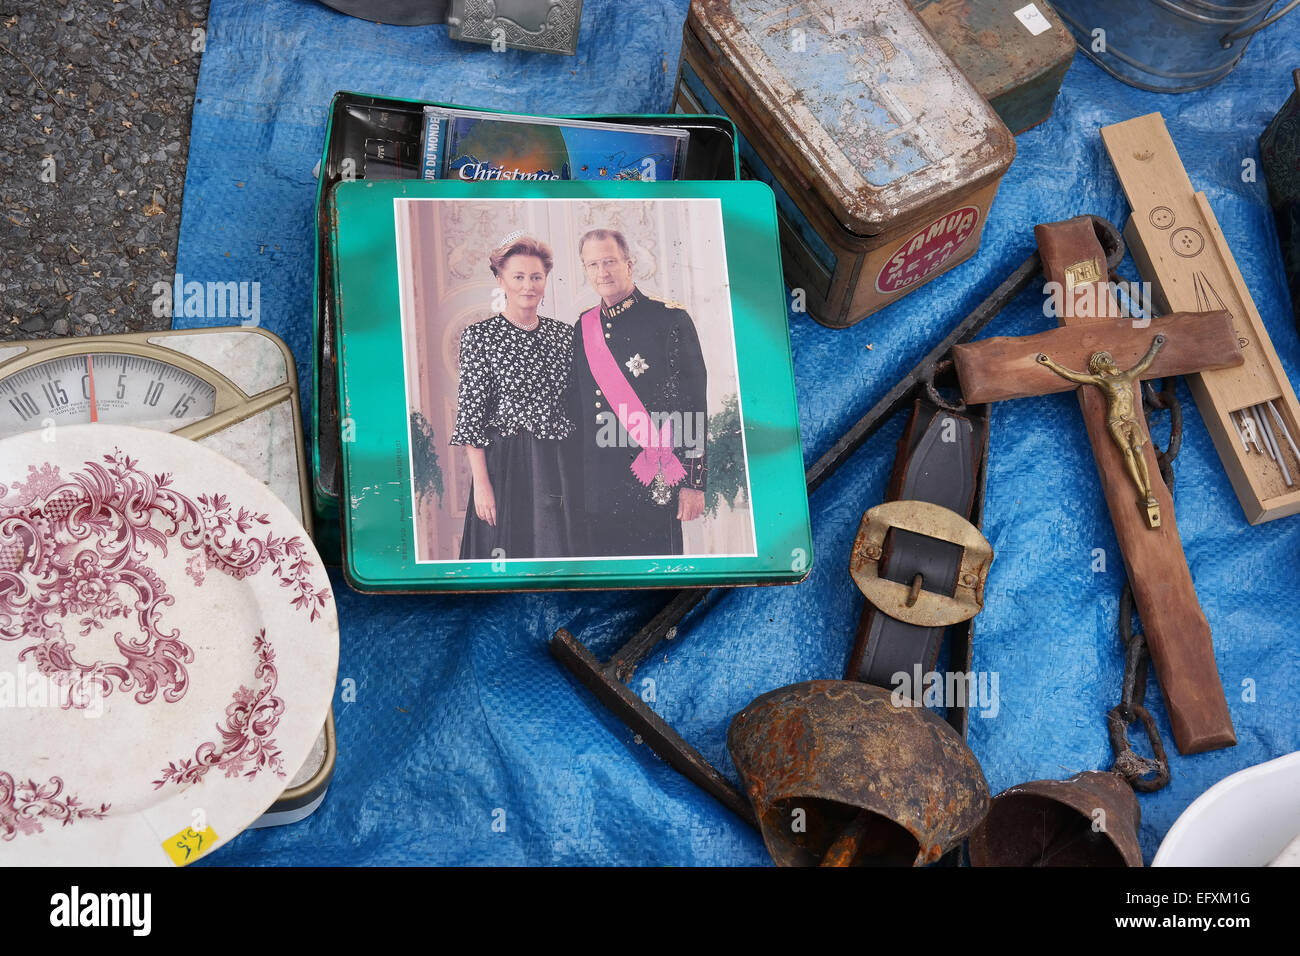 PETIT-RECHAIN, BELGIUM - JULY 2014: Commemorative biscuit tin featuring King Albert II the former king of Belgium at a Brocante Stock Photo